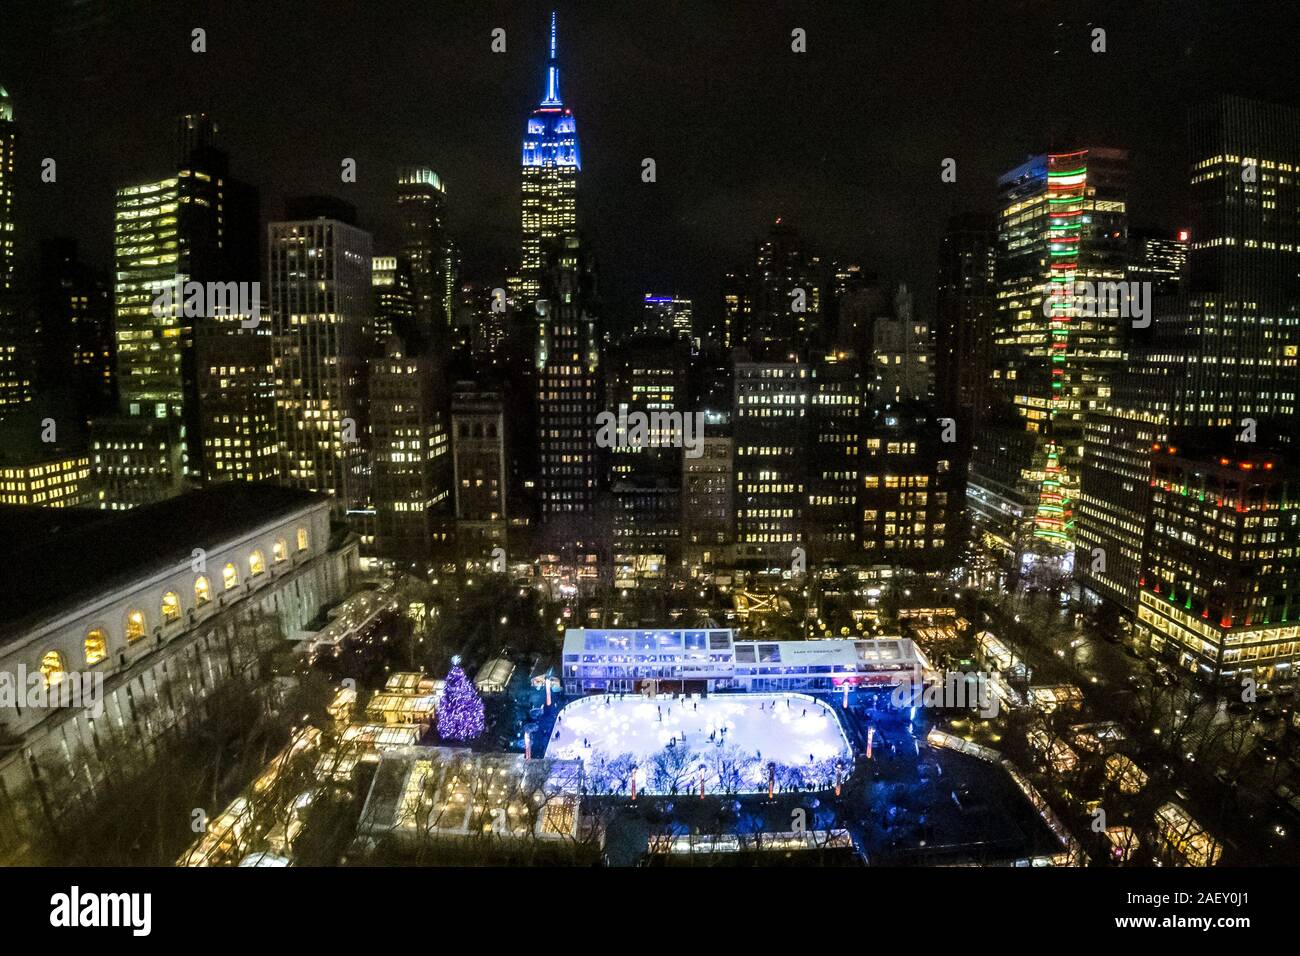 New York, USA,  10 December 2019.   Ice skating at night in Manhattan's Bryant Park.  Credit: Enrique Shore/Alamy Stock Photo Stock Photo